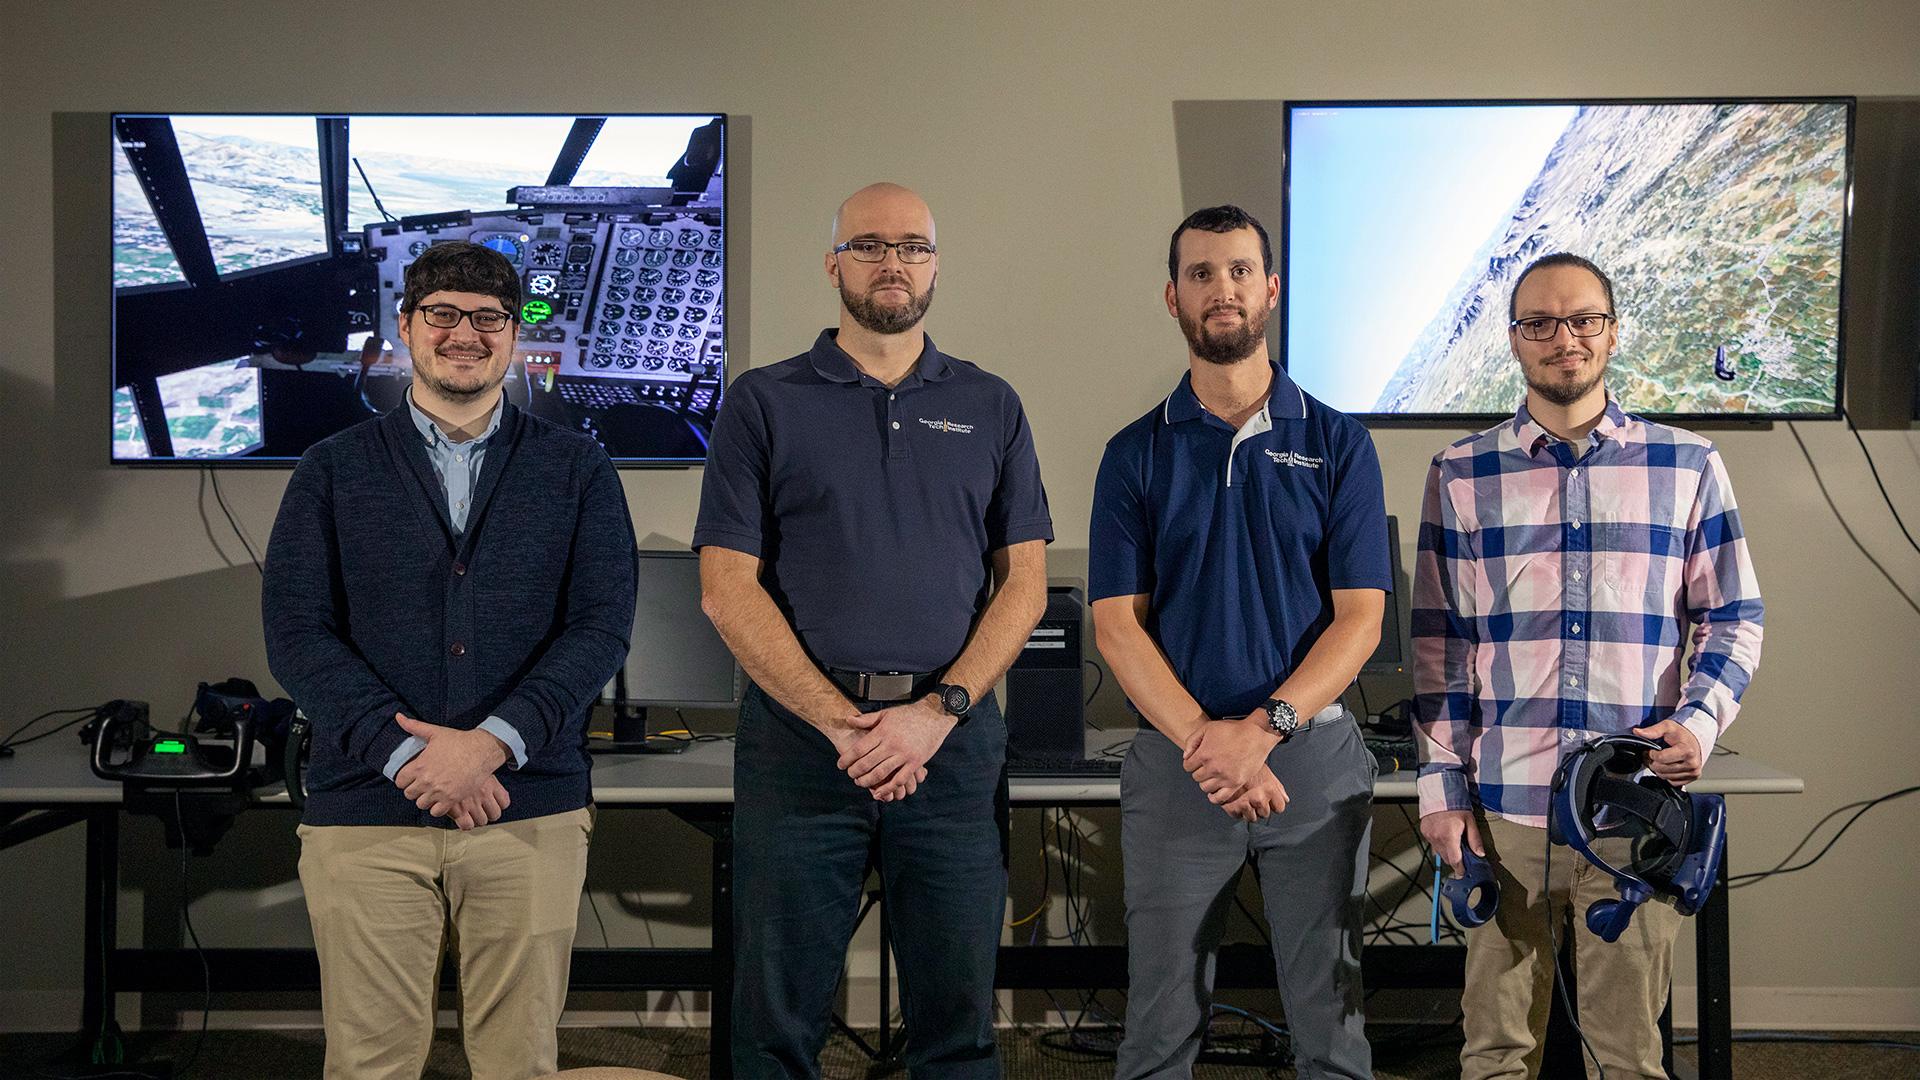 A GTRI research team has worked with the 189th Airlift Wing to develop a high-fidelity immersive multi-player simulation of the battle airspace. Shown (l-r) are: Matthew Hansen, Izudin Ibrahimbegovic, Andrew Braun, and Robert Plante. (Credit: Sean McNeil, GTRI)